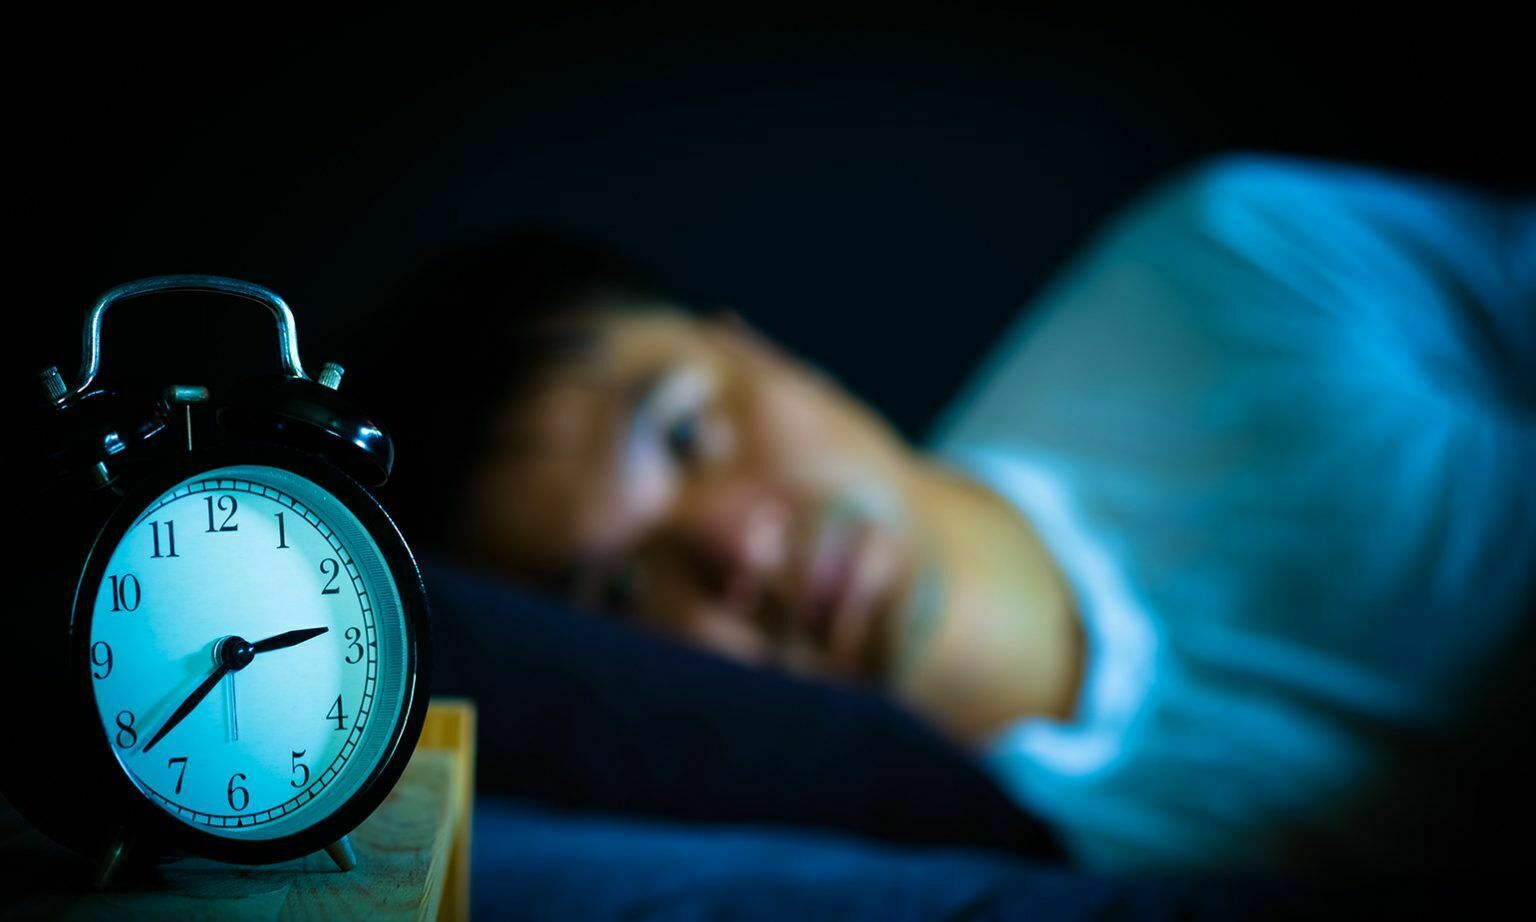 The somnologist explained why the coronavirus deprives of sleep both sick and healthy people